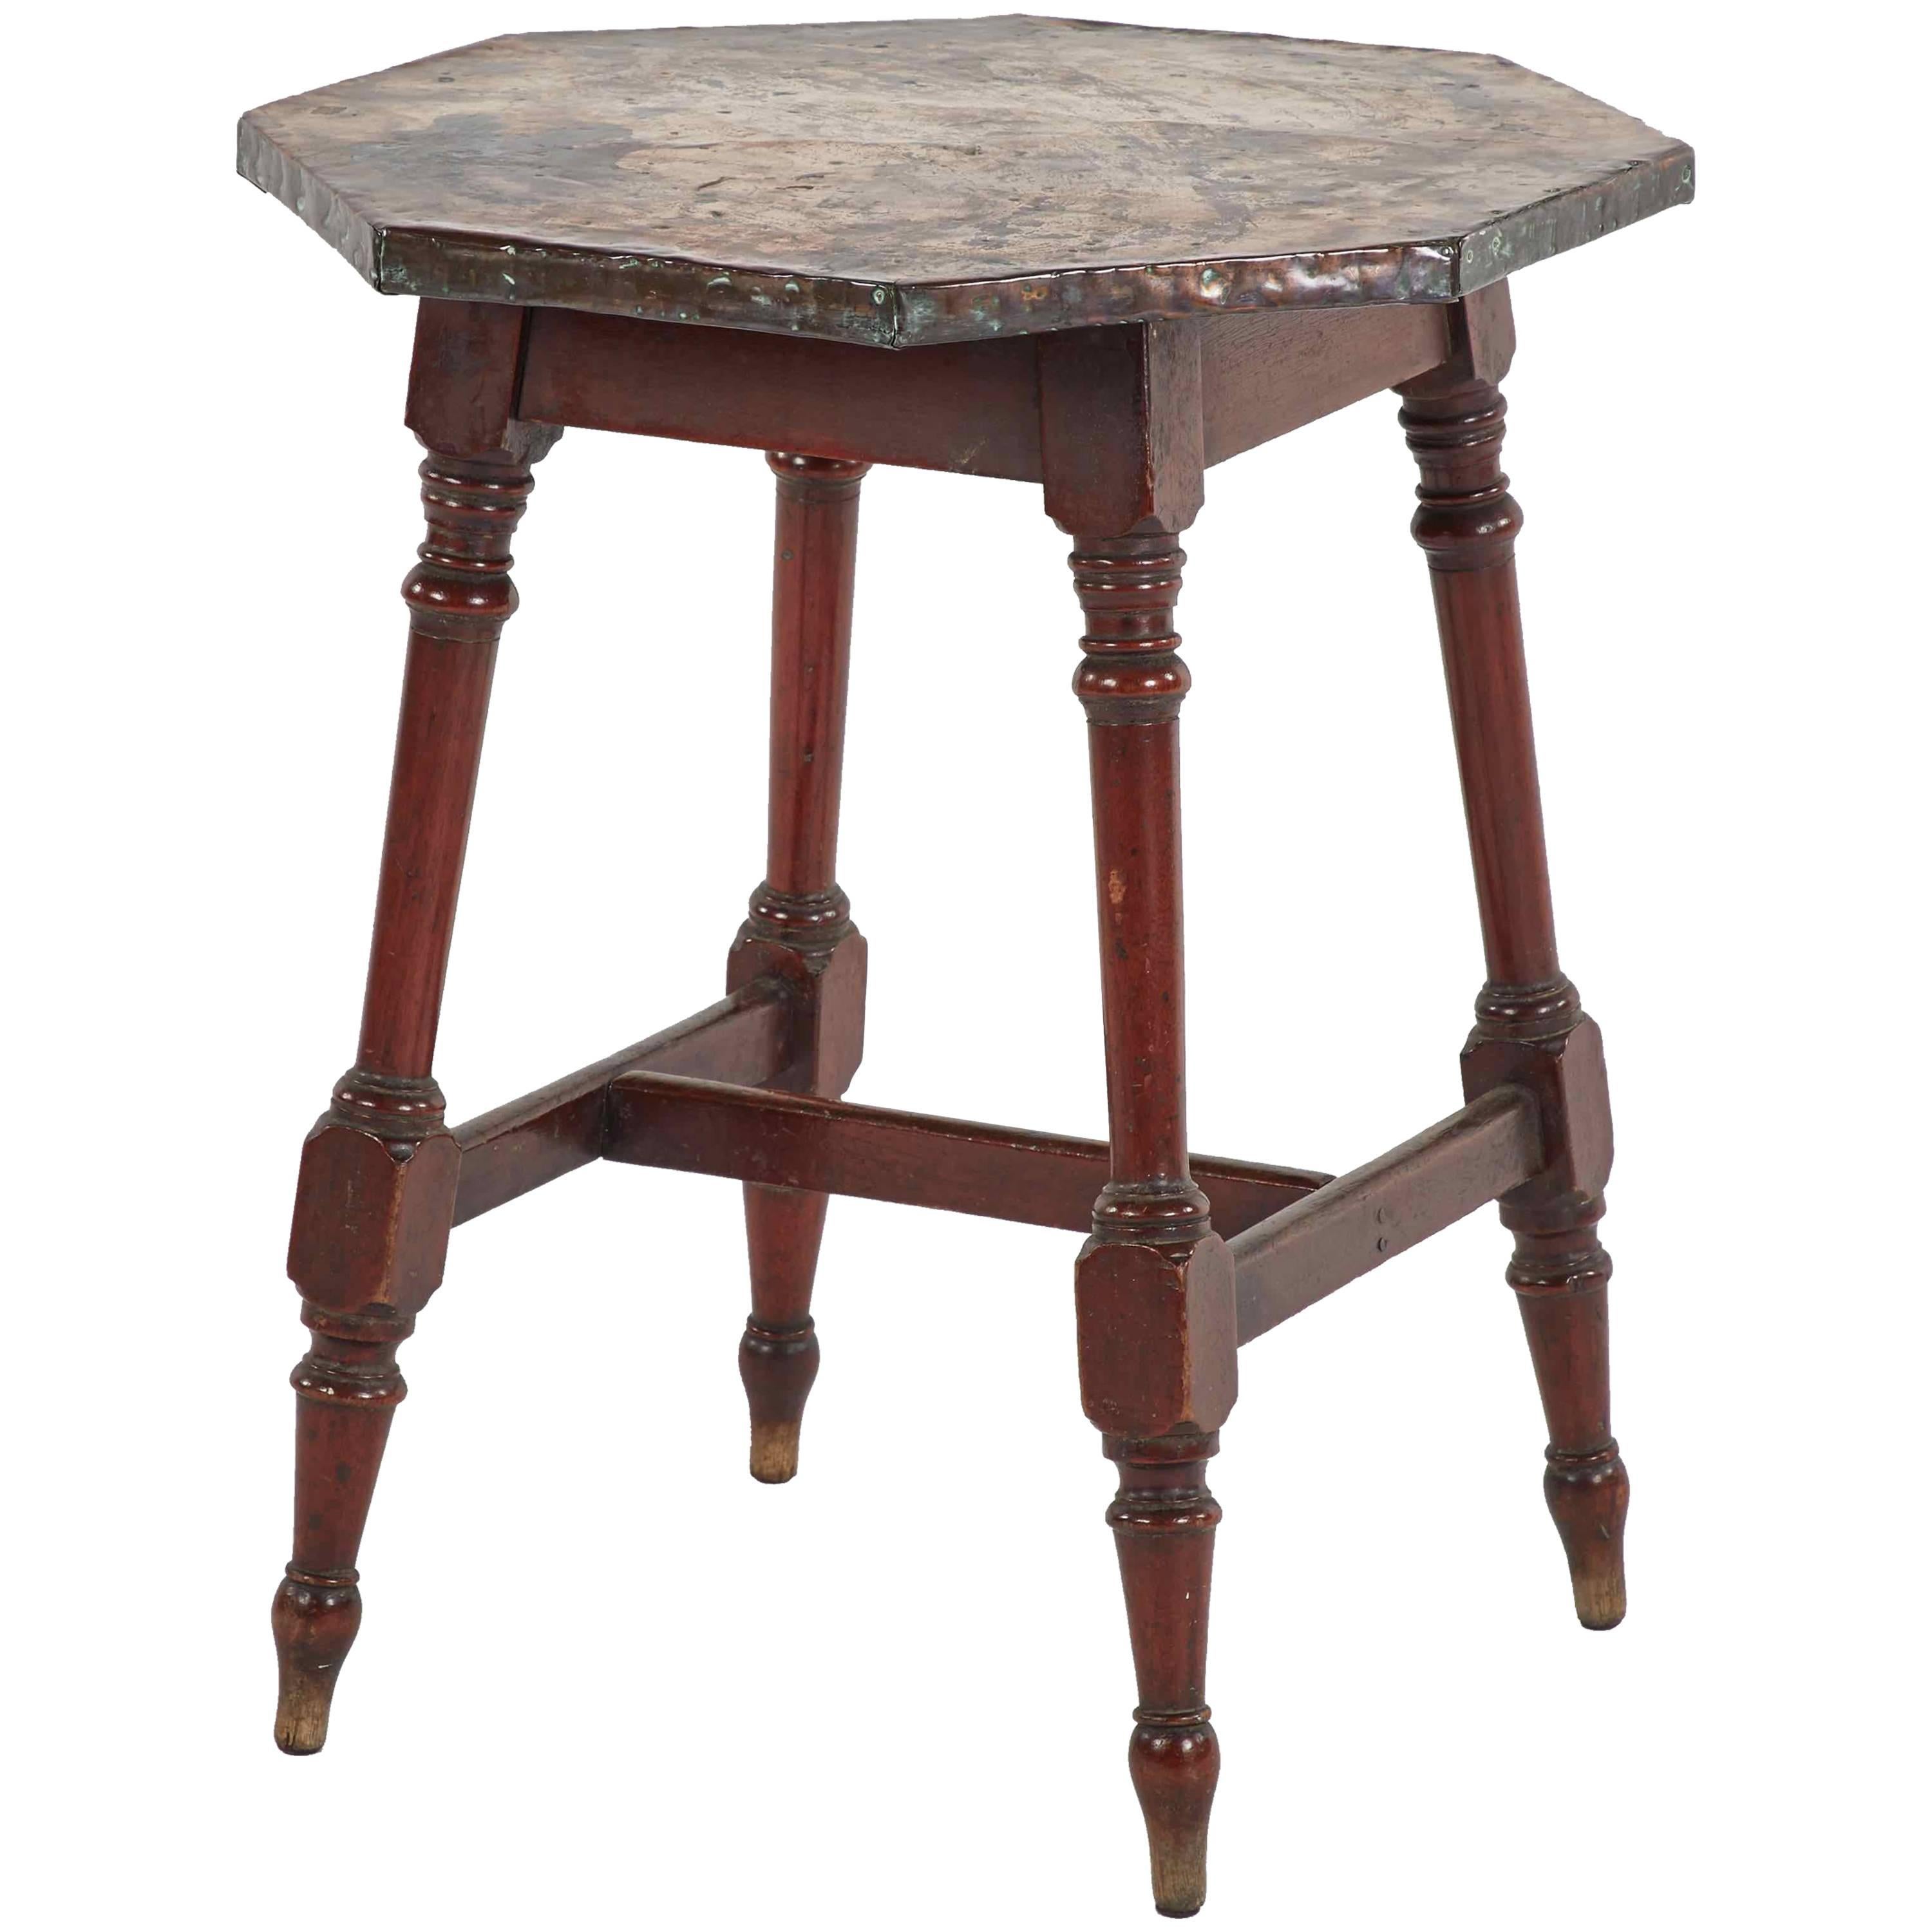 Late 19th Century Copper Top Side Table with Wooden Legs from England 3